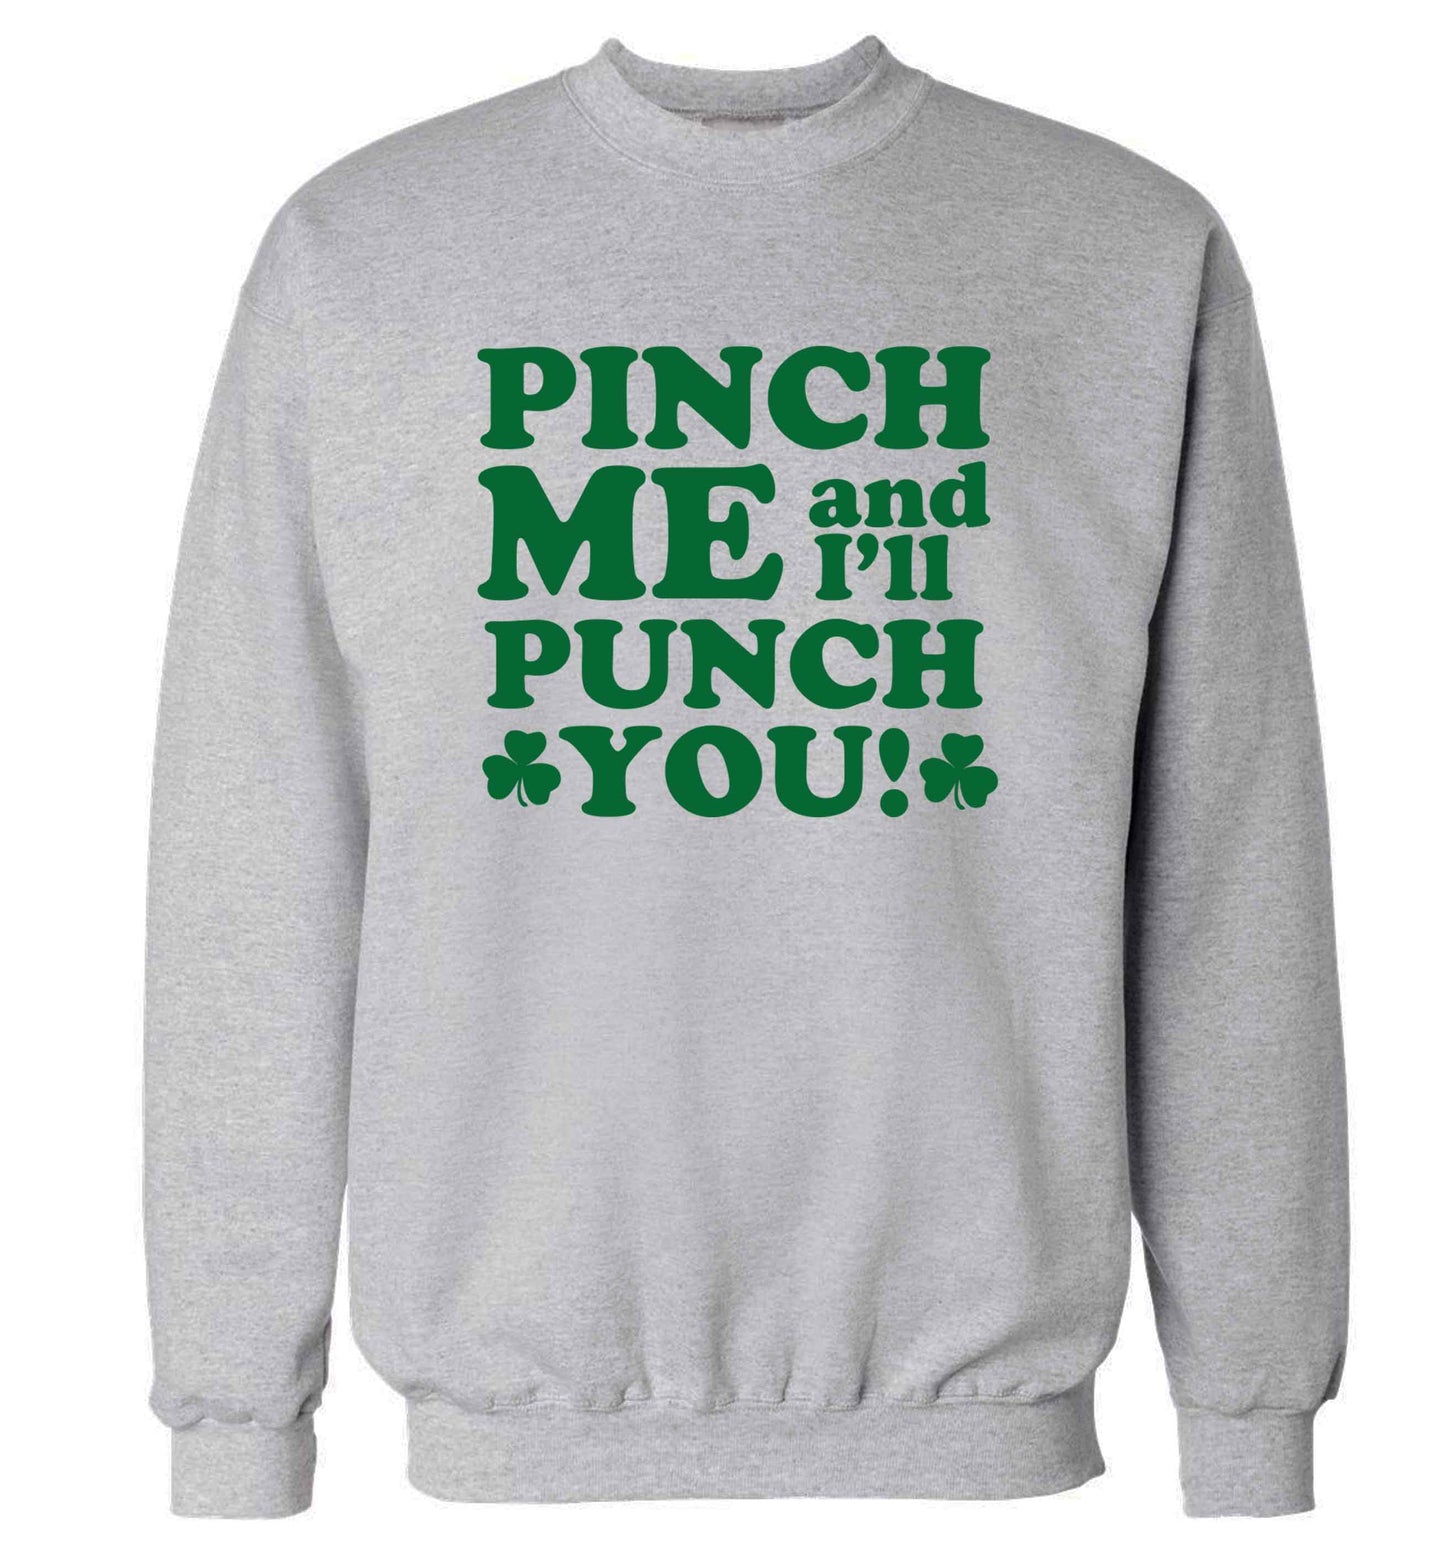 Pinch me and I'll punch you adult's unisex grey sweater 2XL